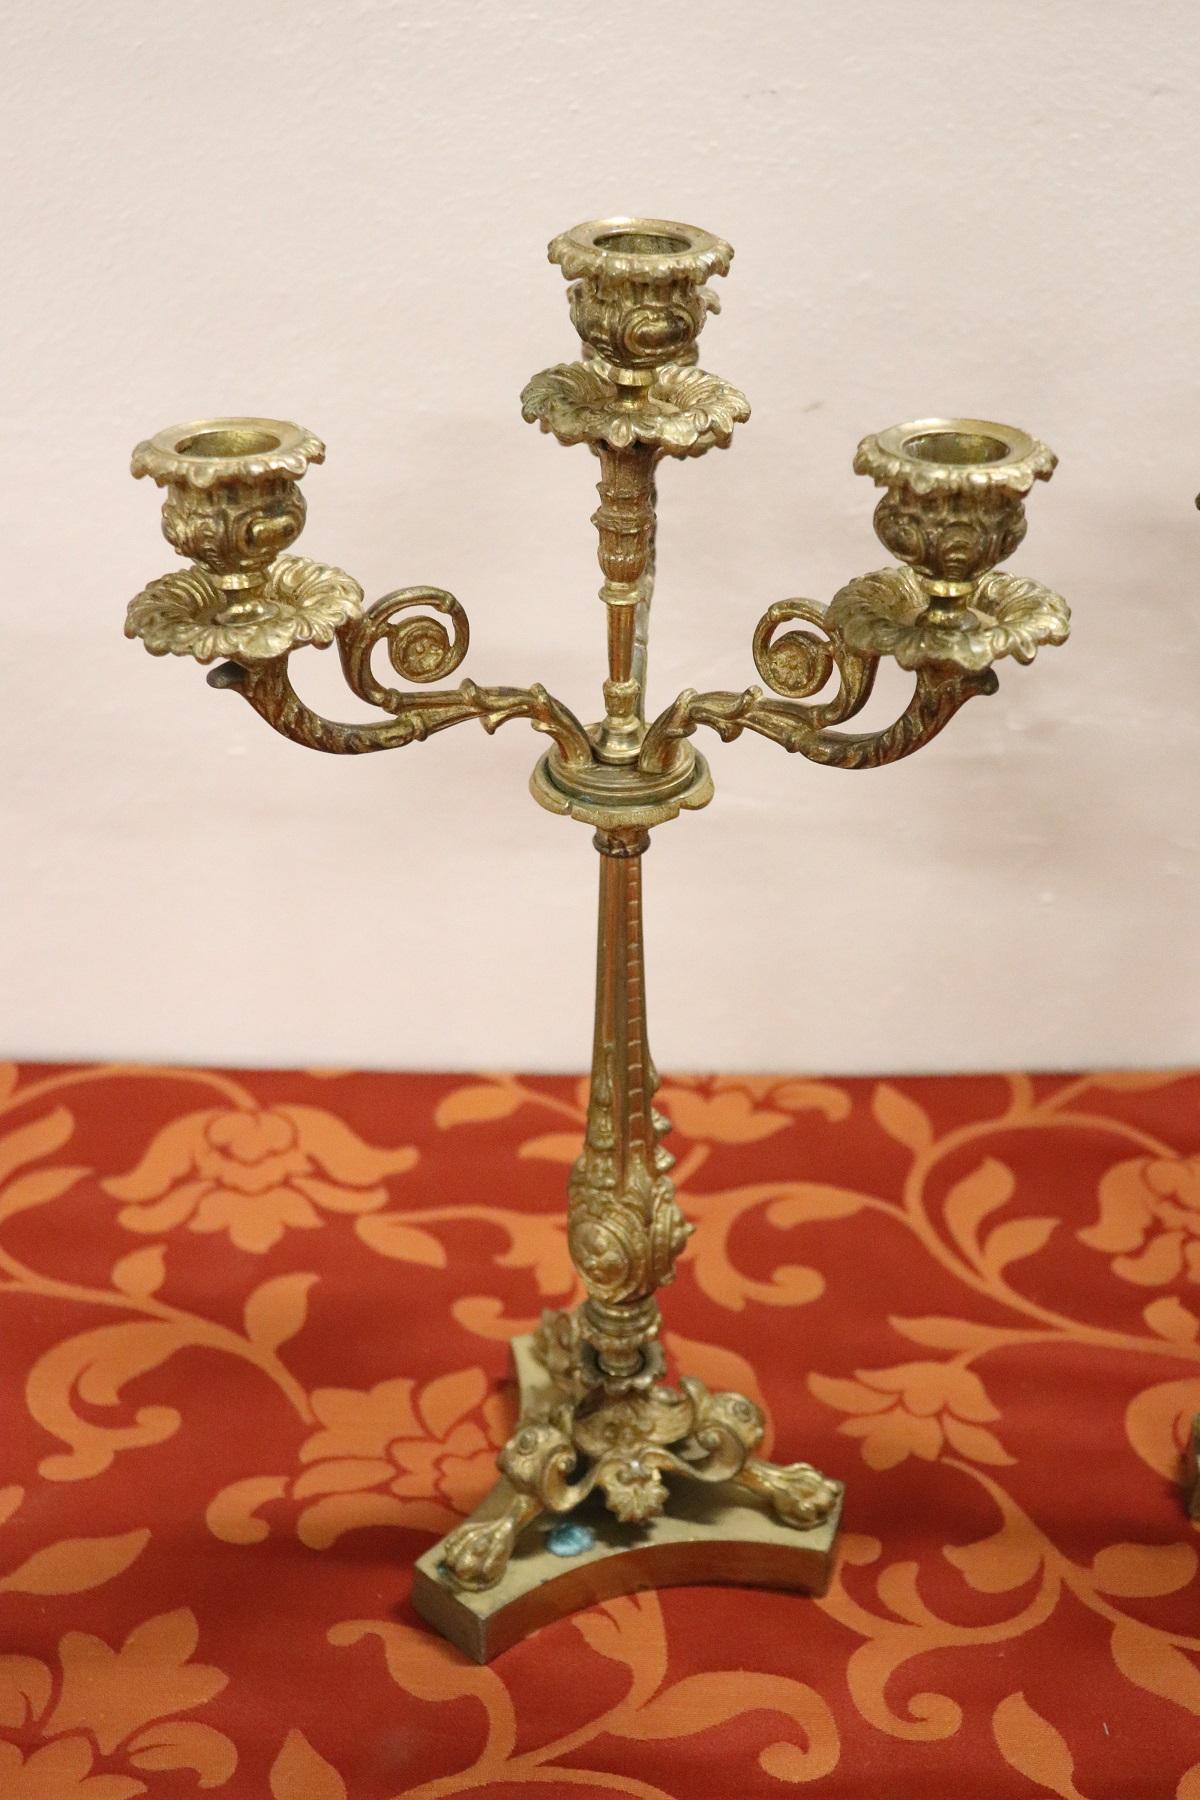 Gilt 19th Century French Napoleon III Pair of Candelabras in Gilded Bronze 4 Arms